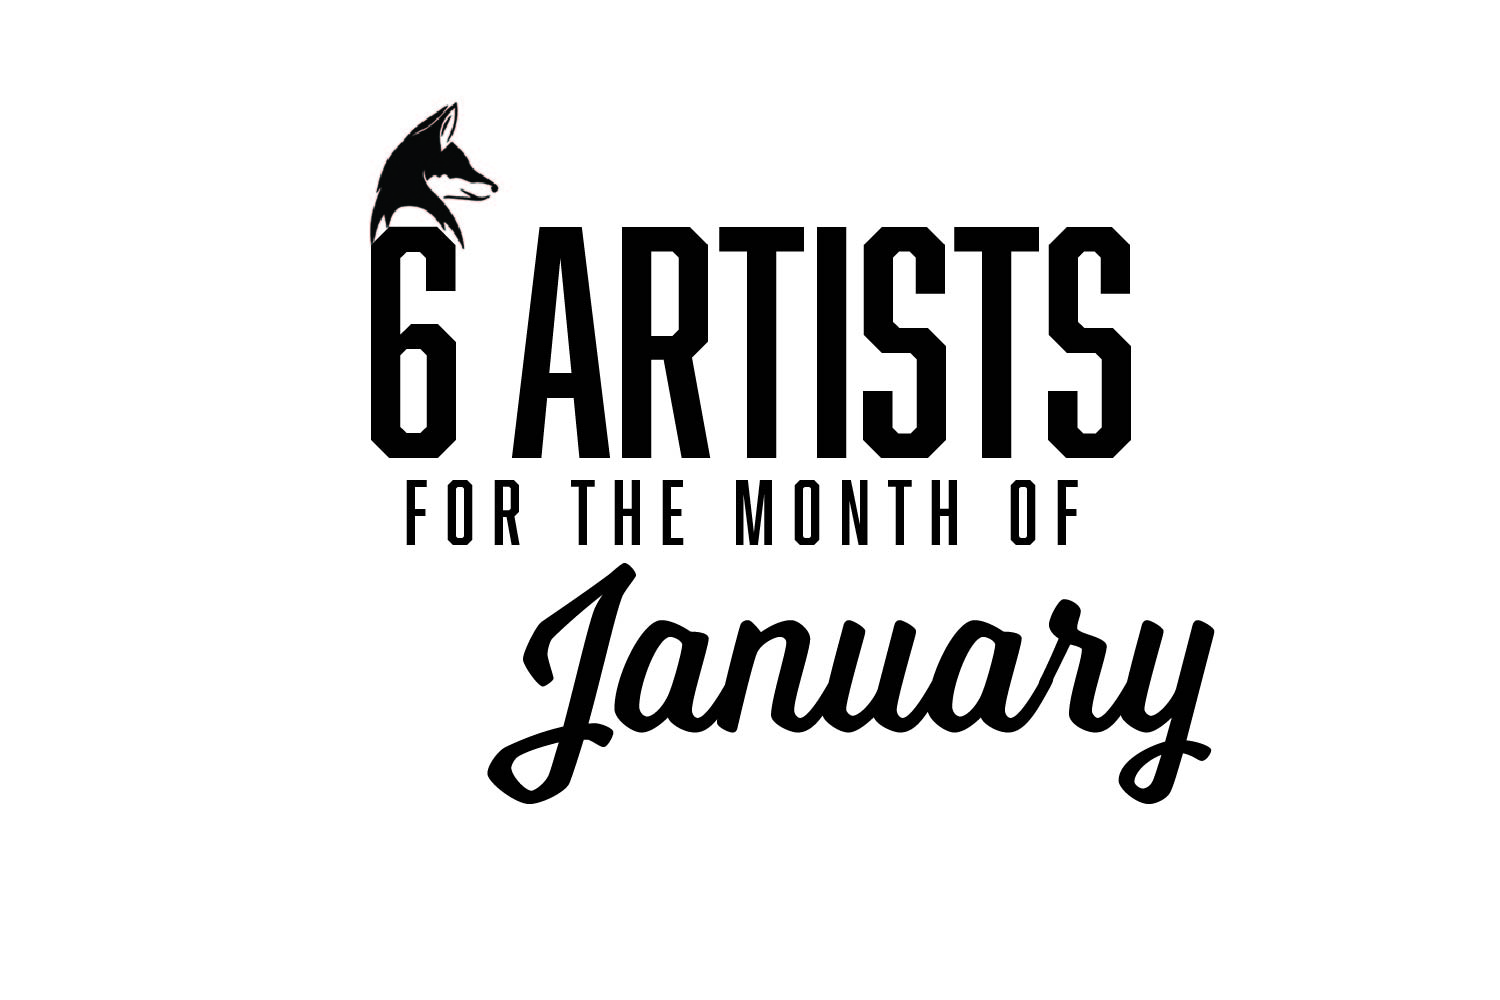 Six Artists You Should Be Listening To: January 2022 Edition